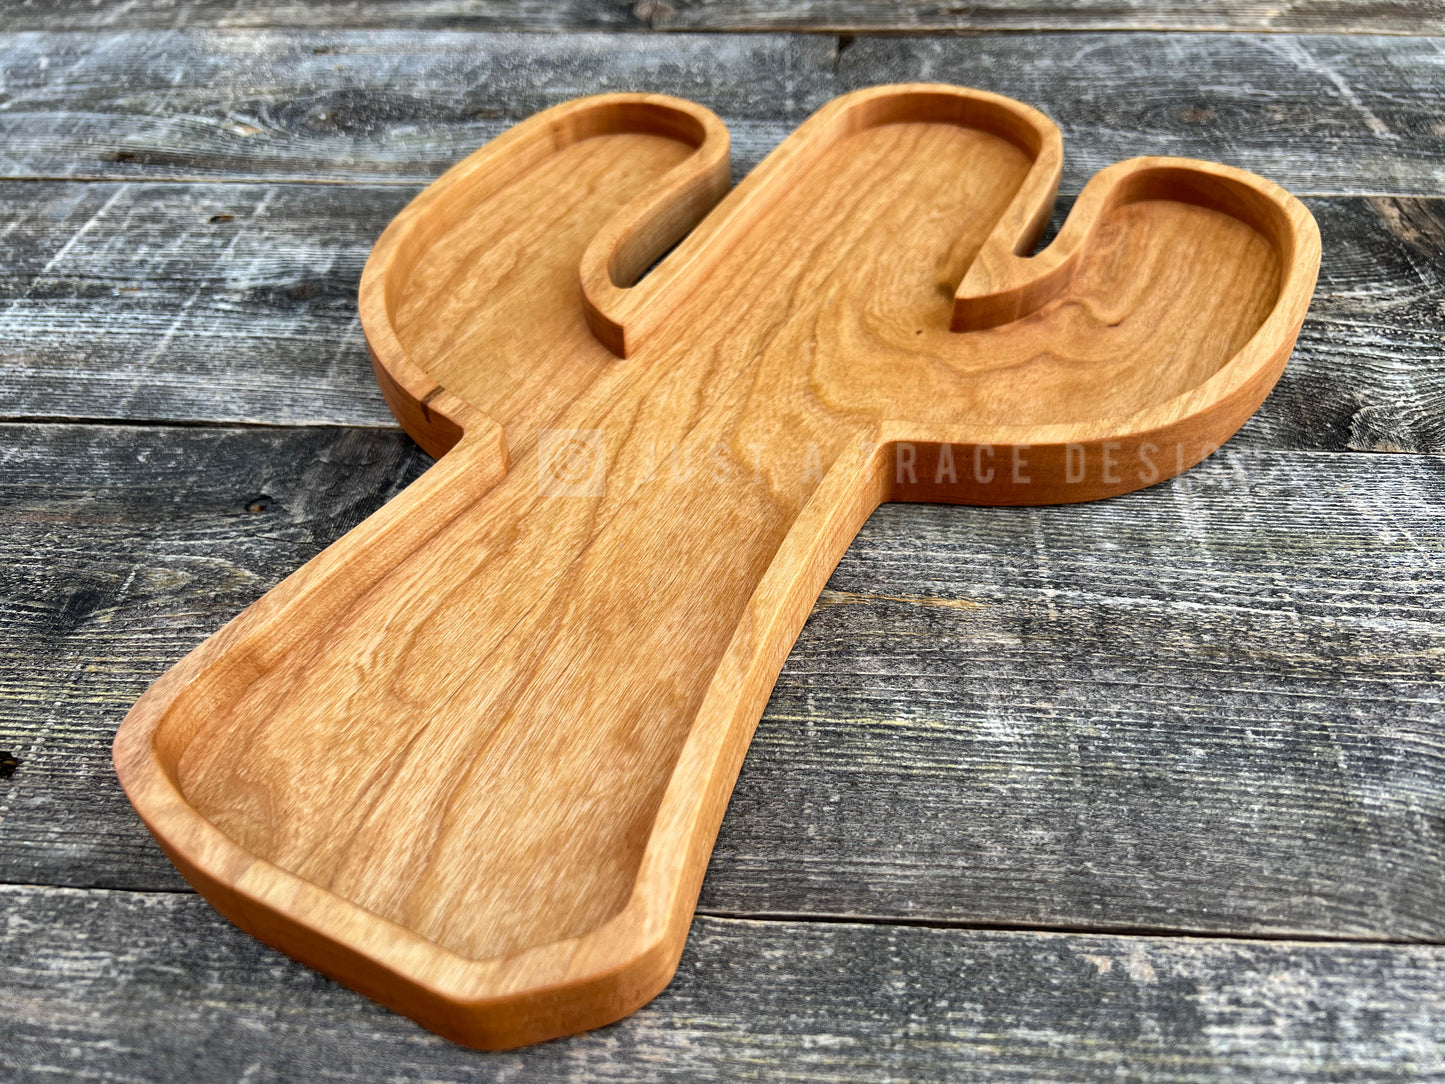 Cactus Shaped Ash Charcuterie Tray, Grazing Board, Charcuterie Board, Coffee Table, Wood Platter, Serving Tray, Wooden Dish, Southwest Design Tray